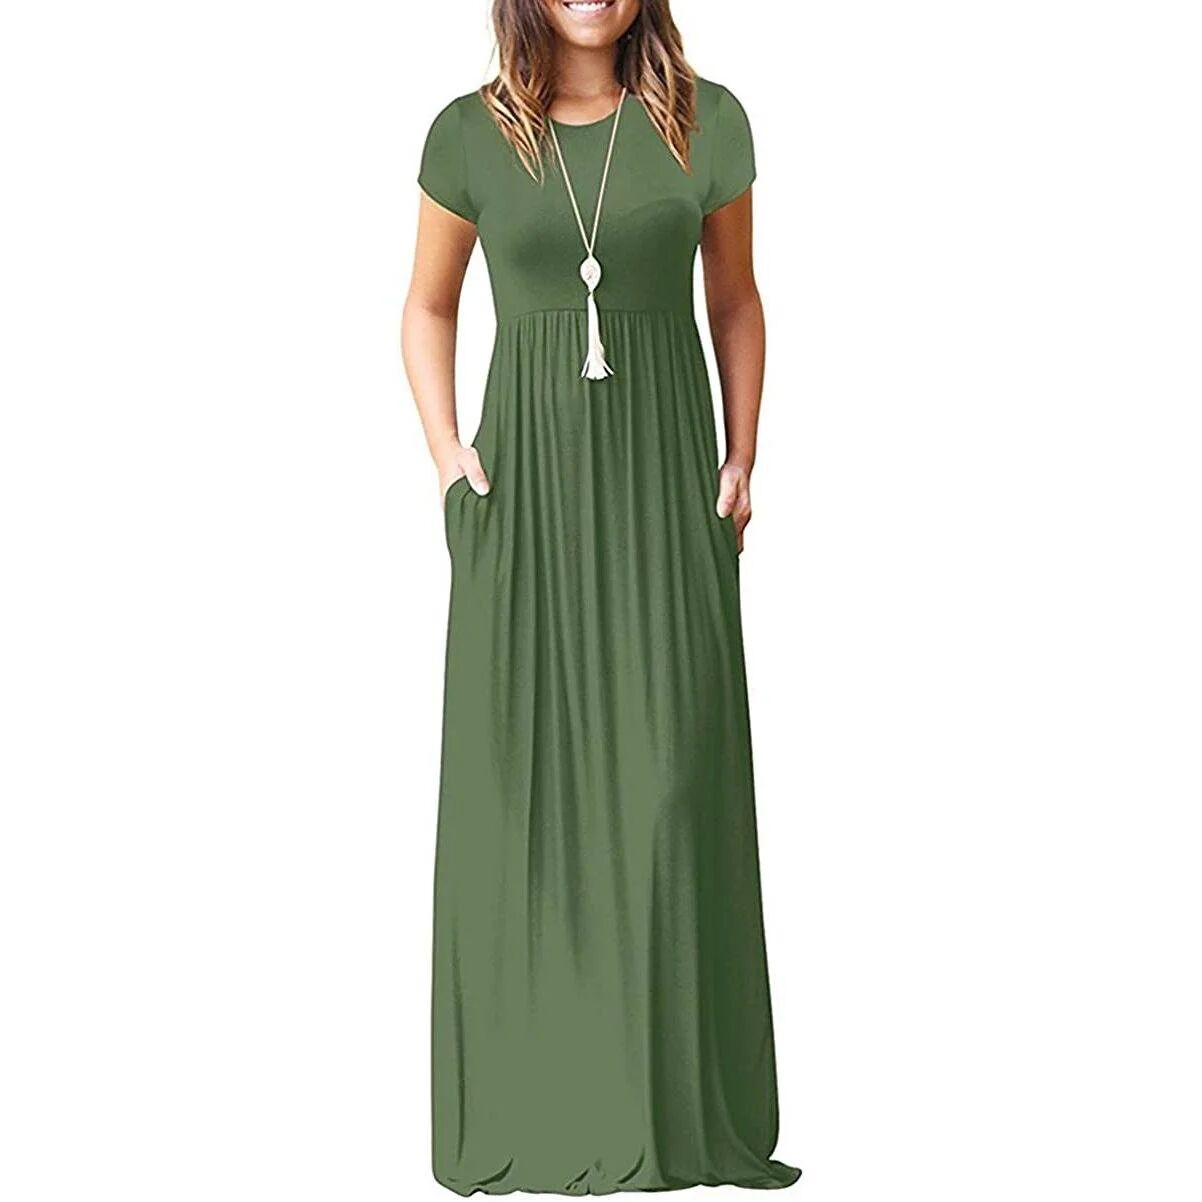 DailySale Women's Short Sleeve Loose Casual Long Dresses with Pockets